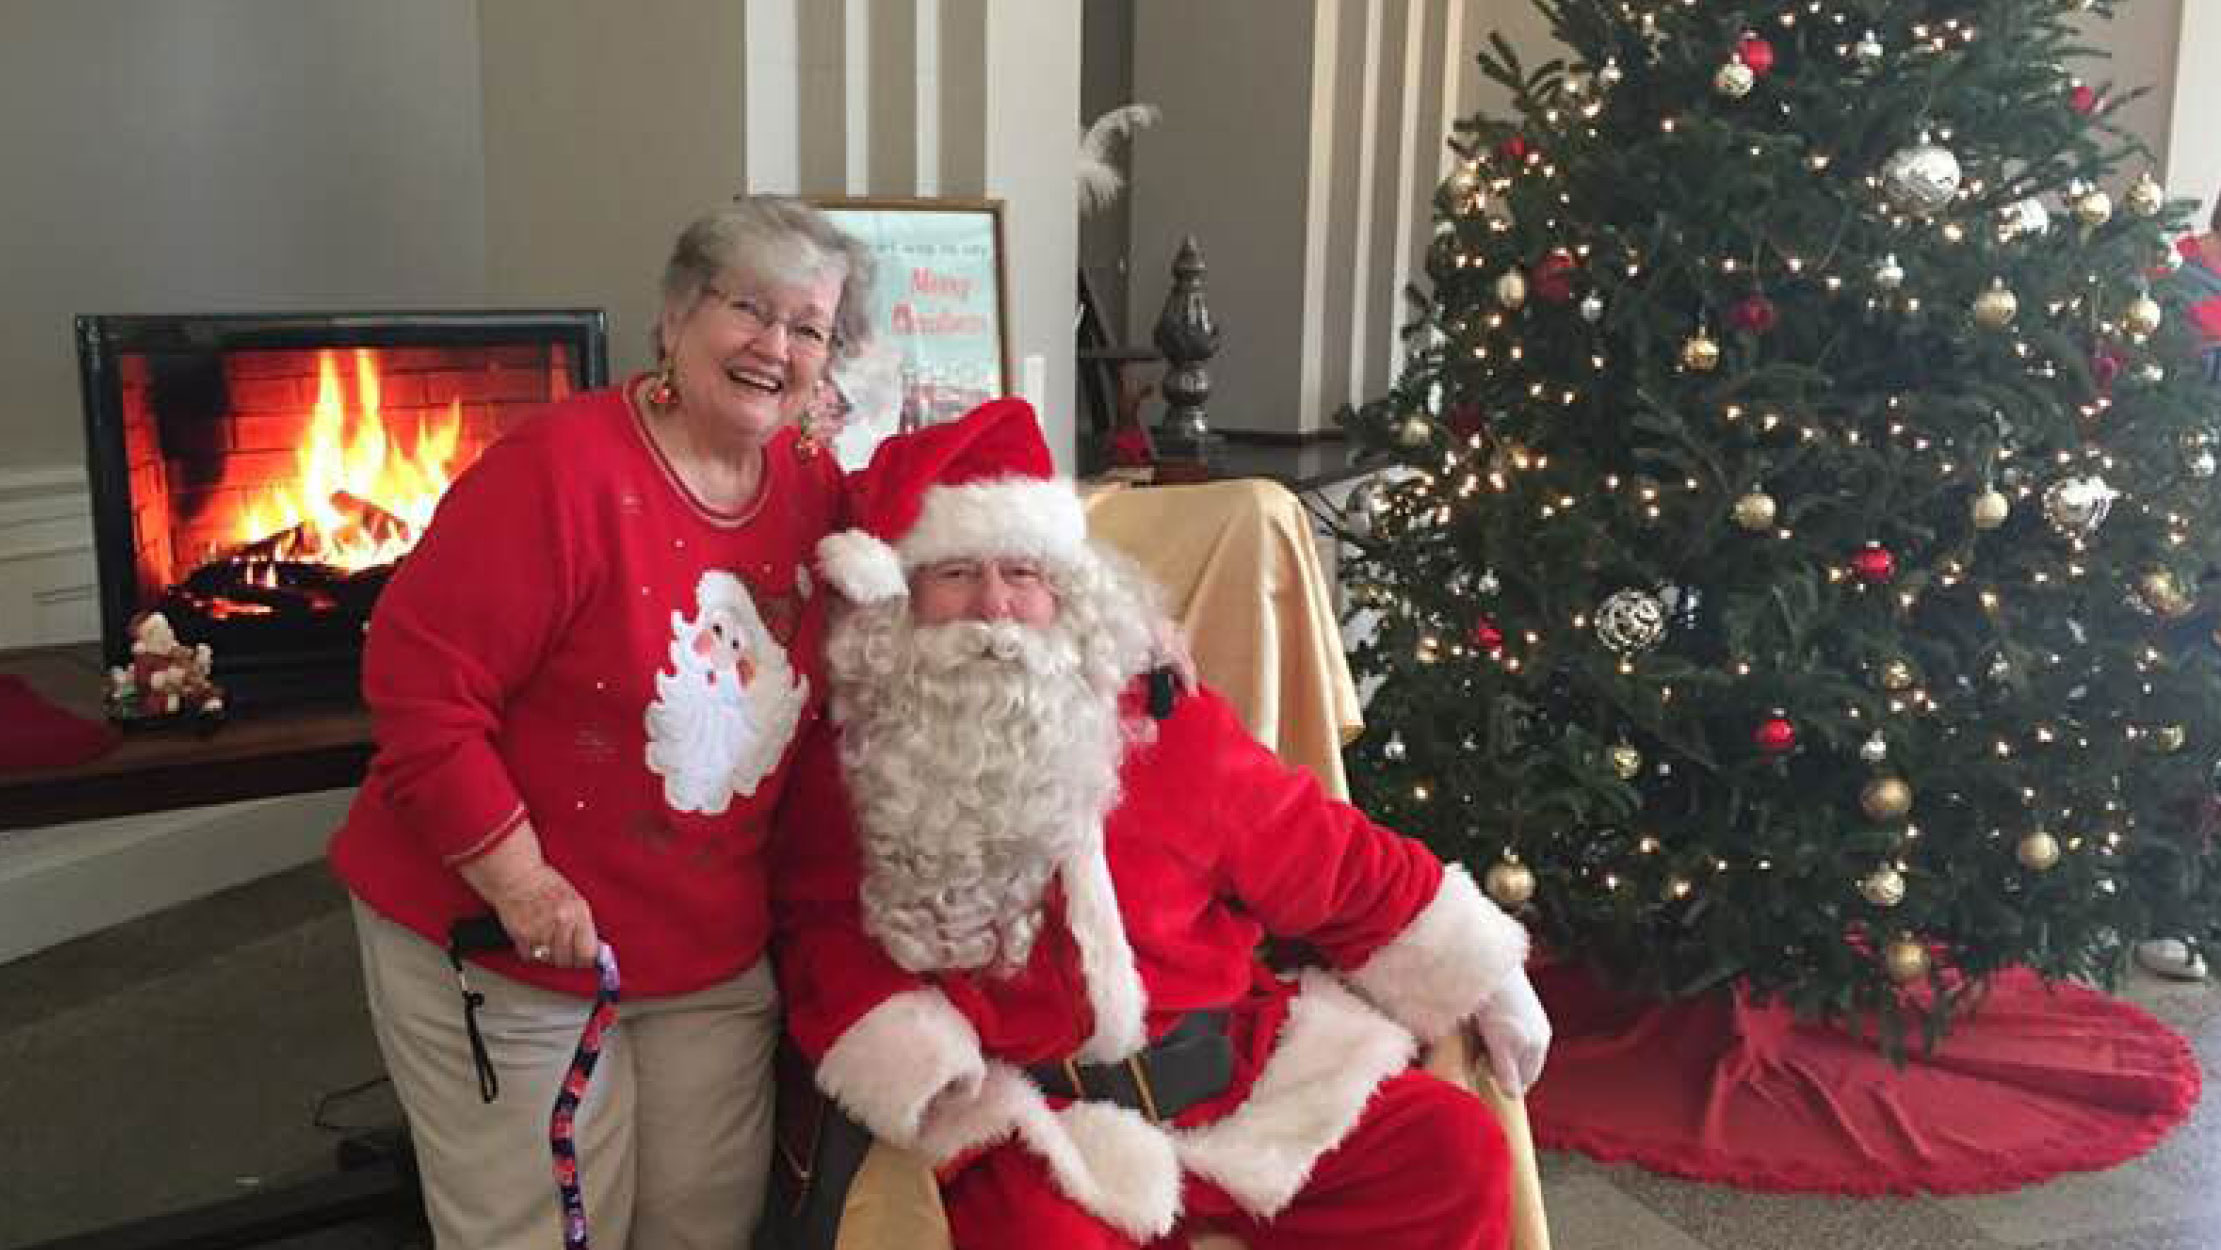 Mayor John R. Knox of Waycross, Georgia attended Ware Hotel’s Downtown Santa Party to support local businesses as they donated presents to the community’s children.